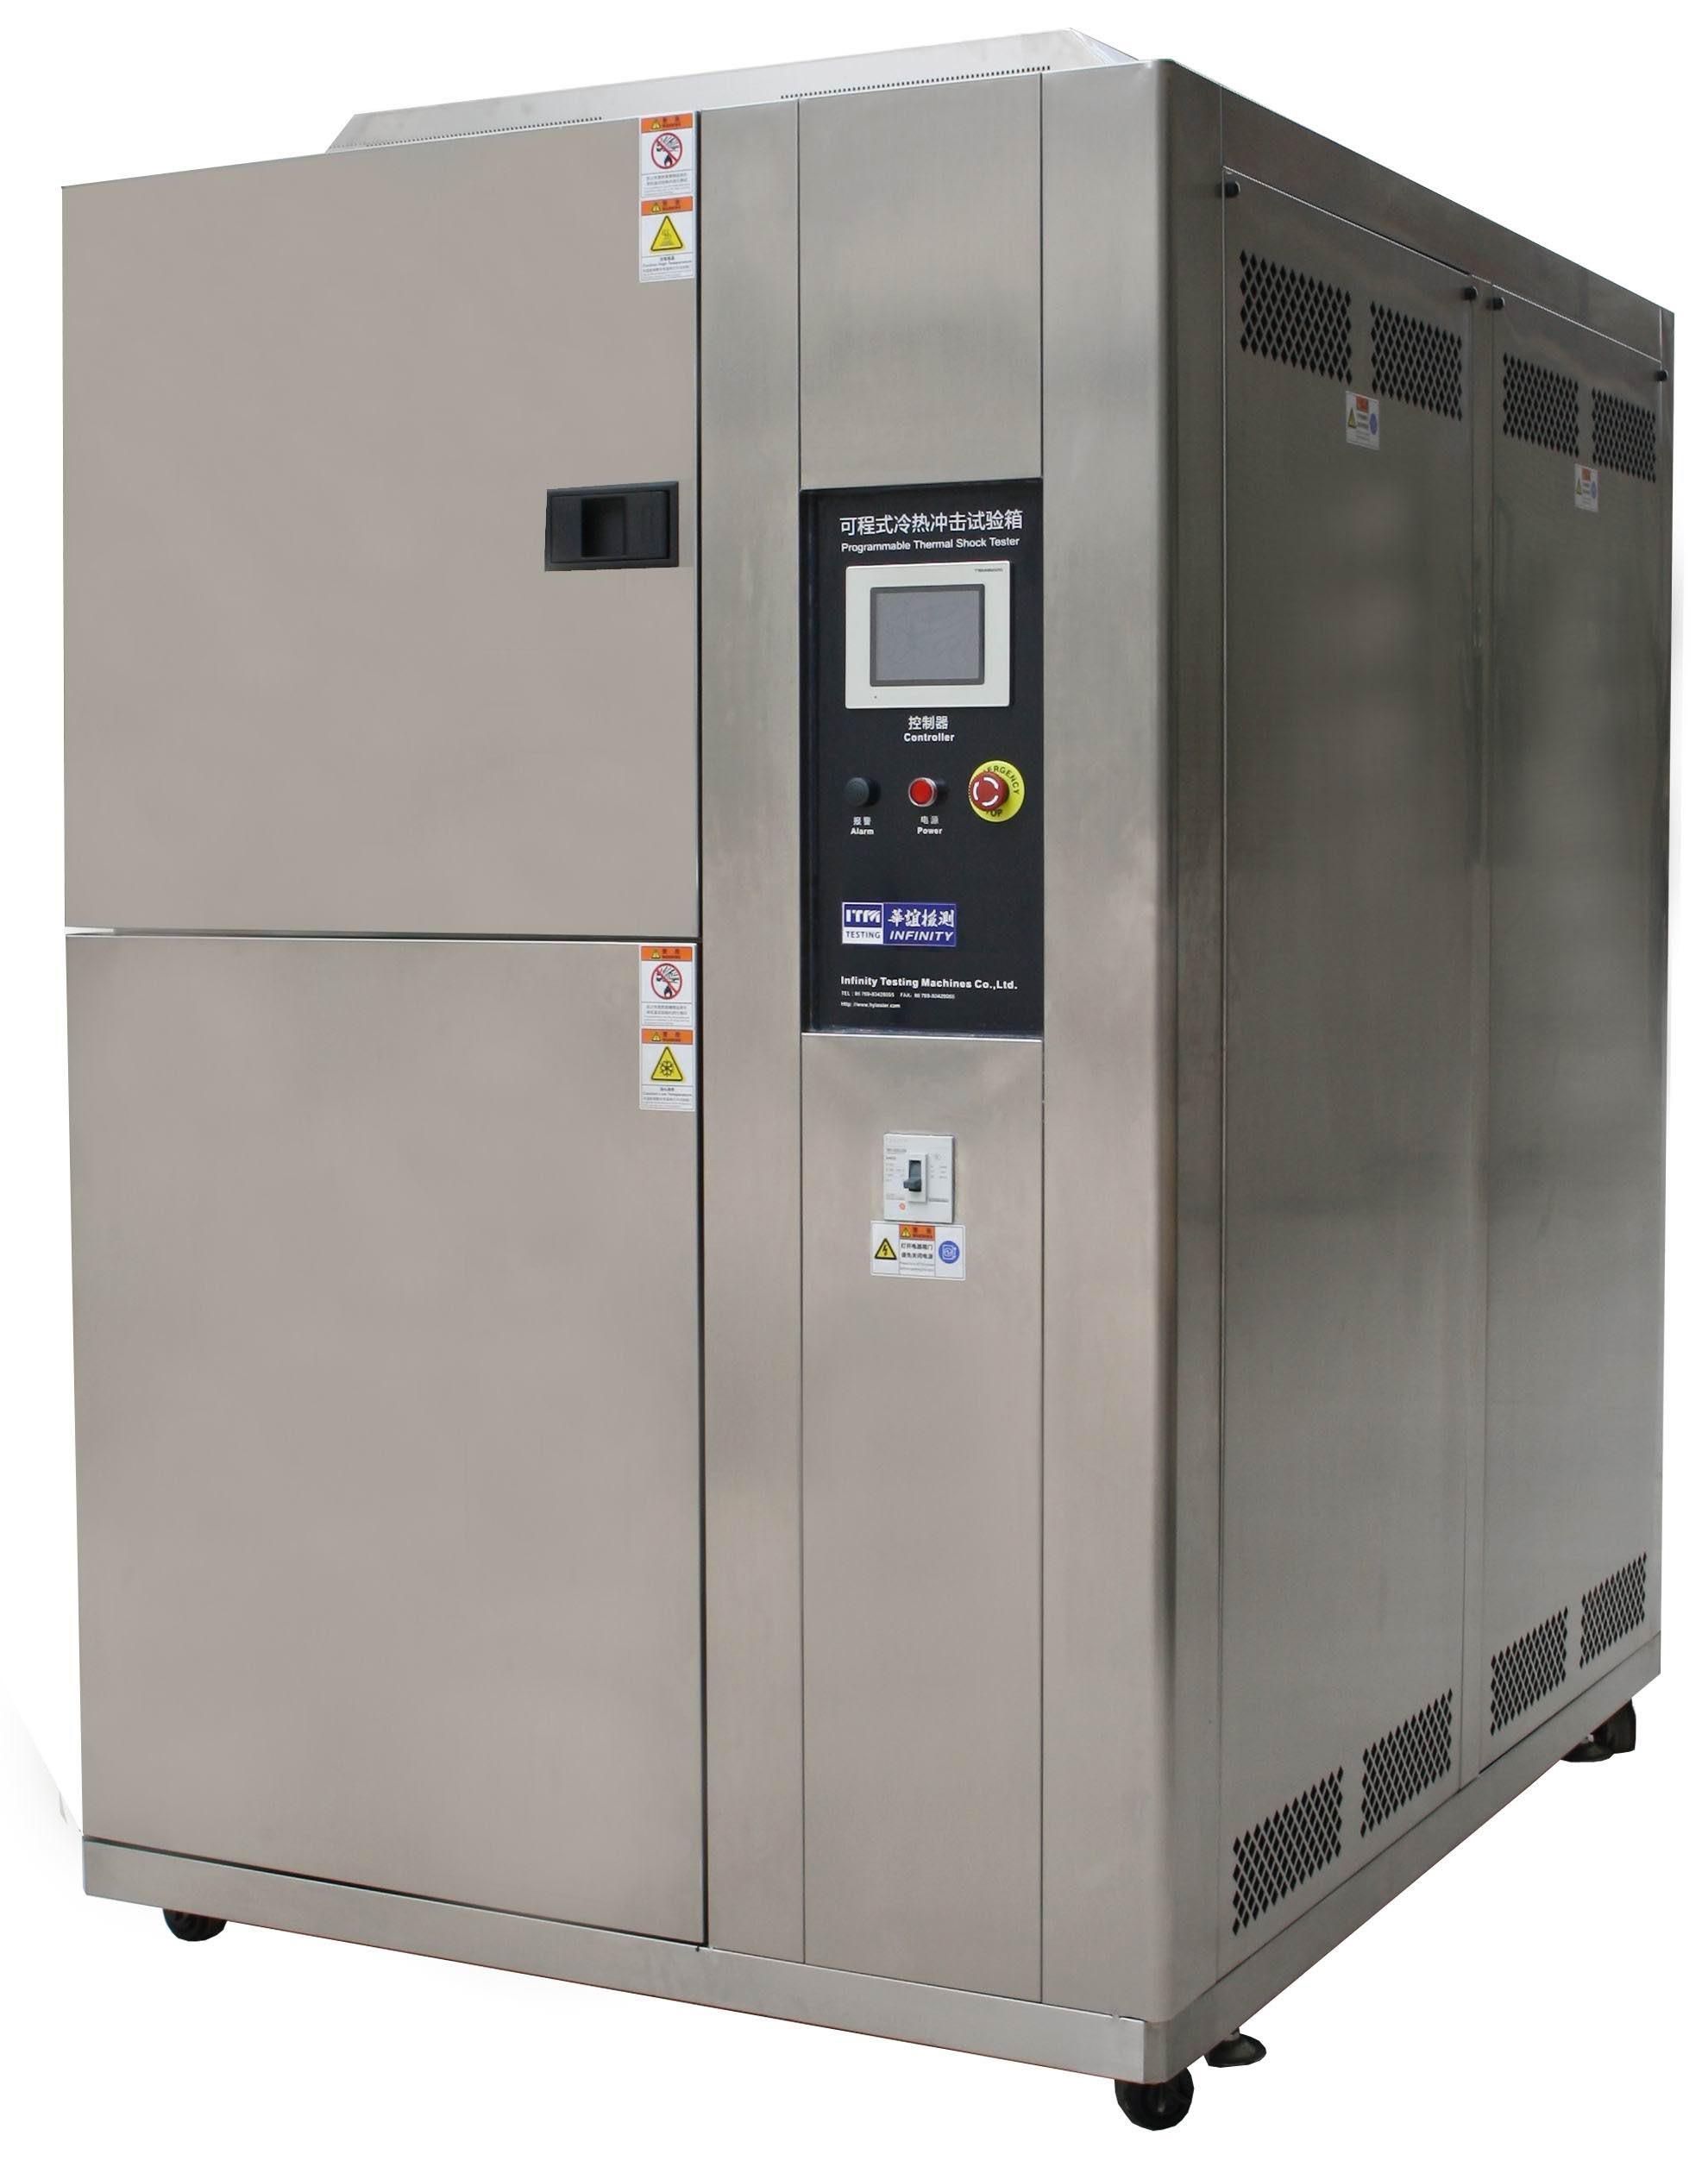 Thermal Shock Environmental Test Chambers For Temperature And Humidity Testing